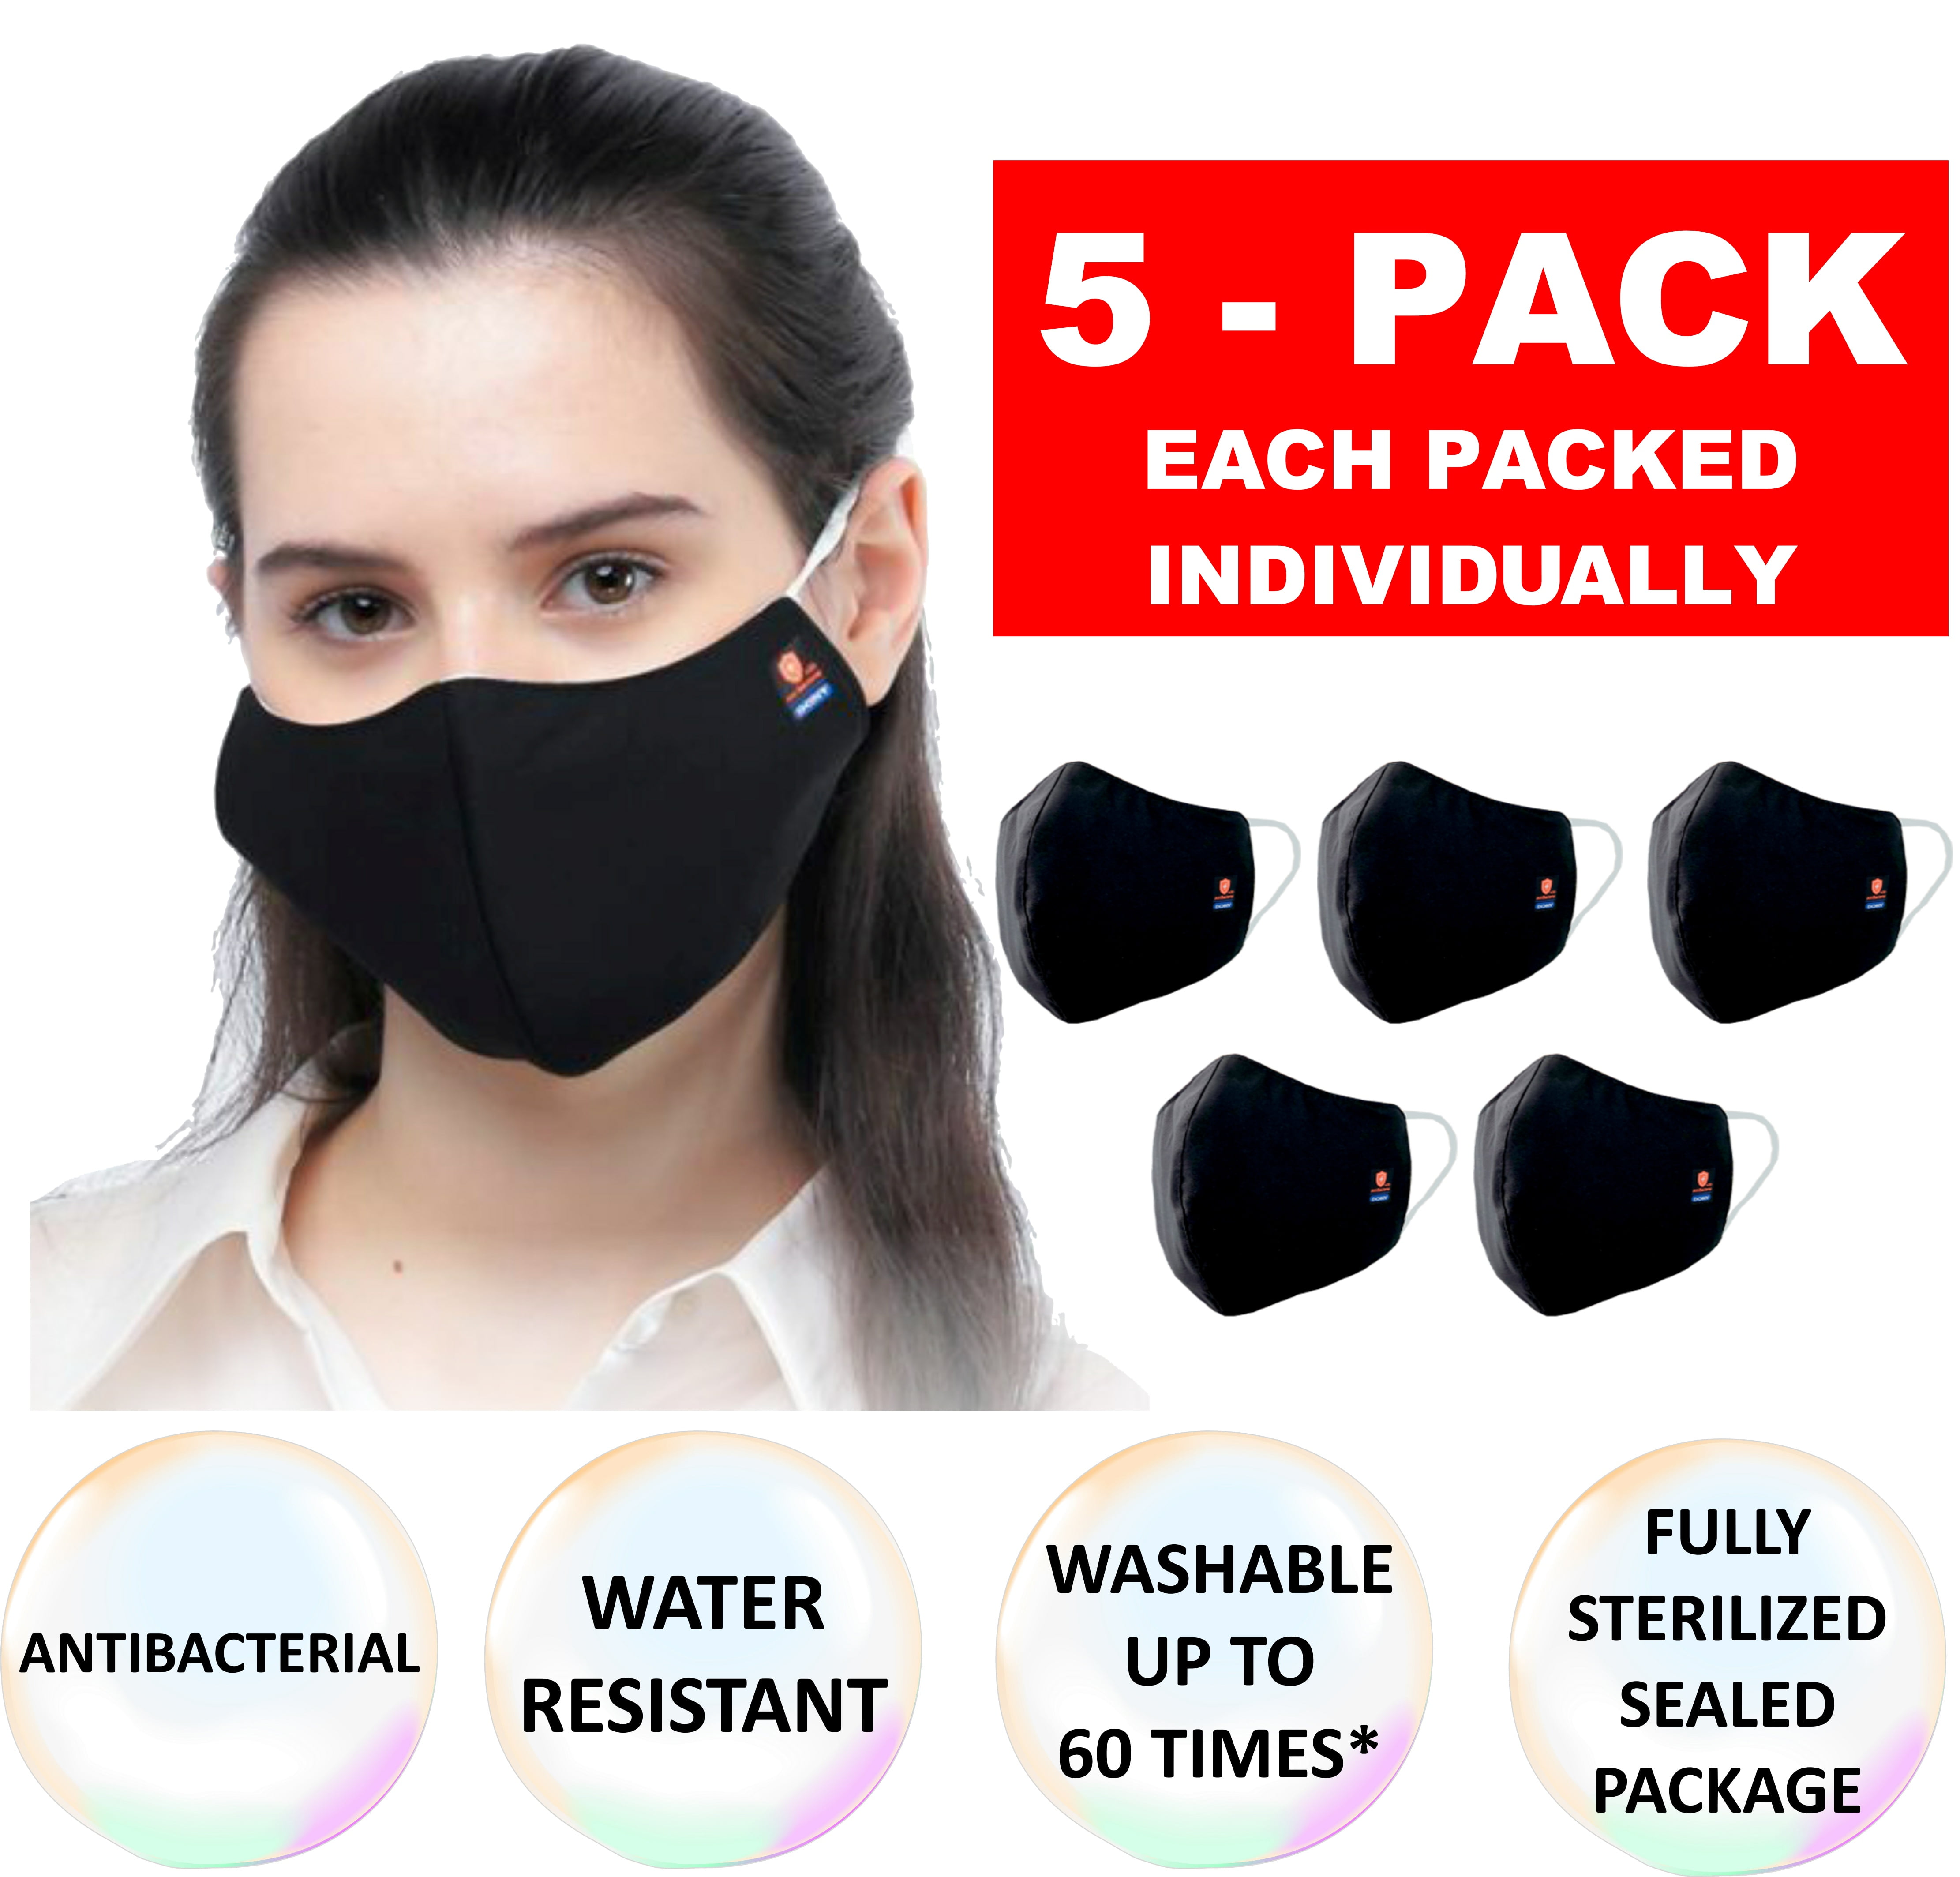 USA Made Olive Green Ergo Face Mask with Filter Pocket Washable Breathable Comfortable Contoured for Best Fit